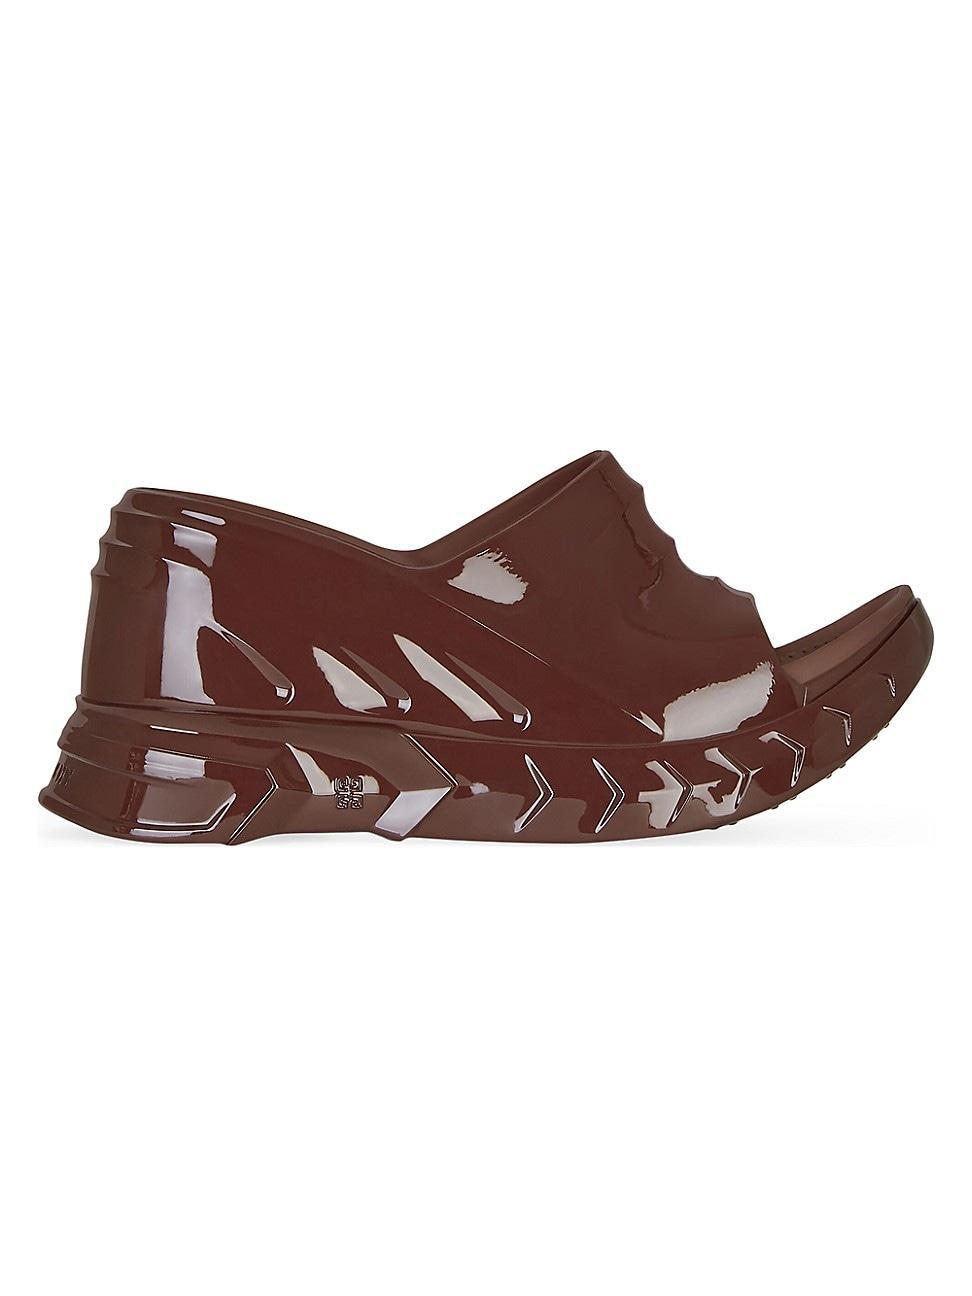 Womens Marshmallow Sandals in Rubber Product Image